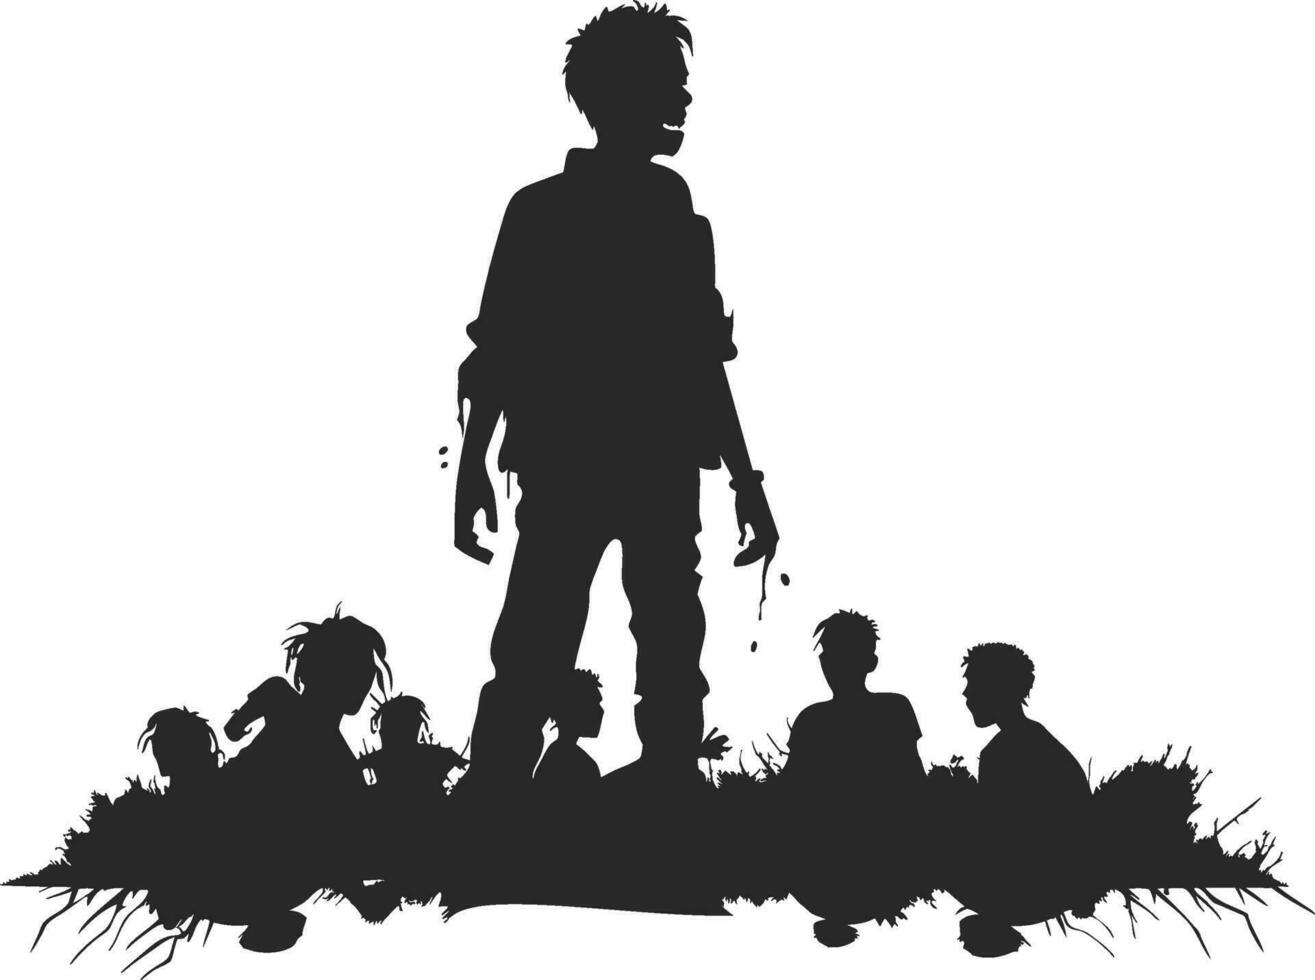 vector zombie characters. standing zombie and lying zombies. many scary zombies vector illusration on white background.